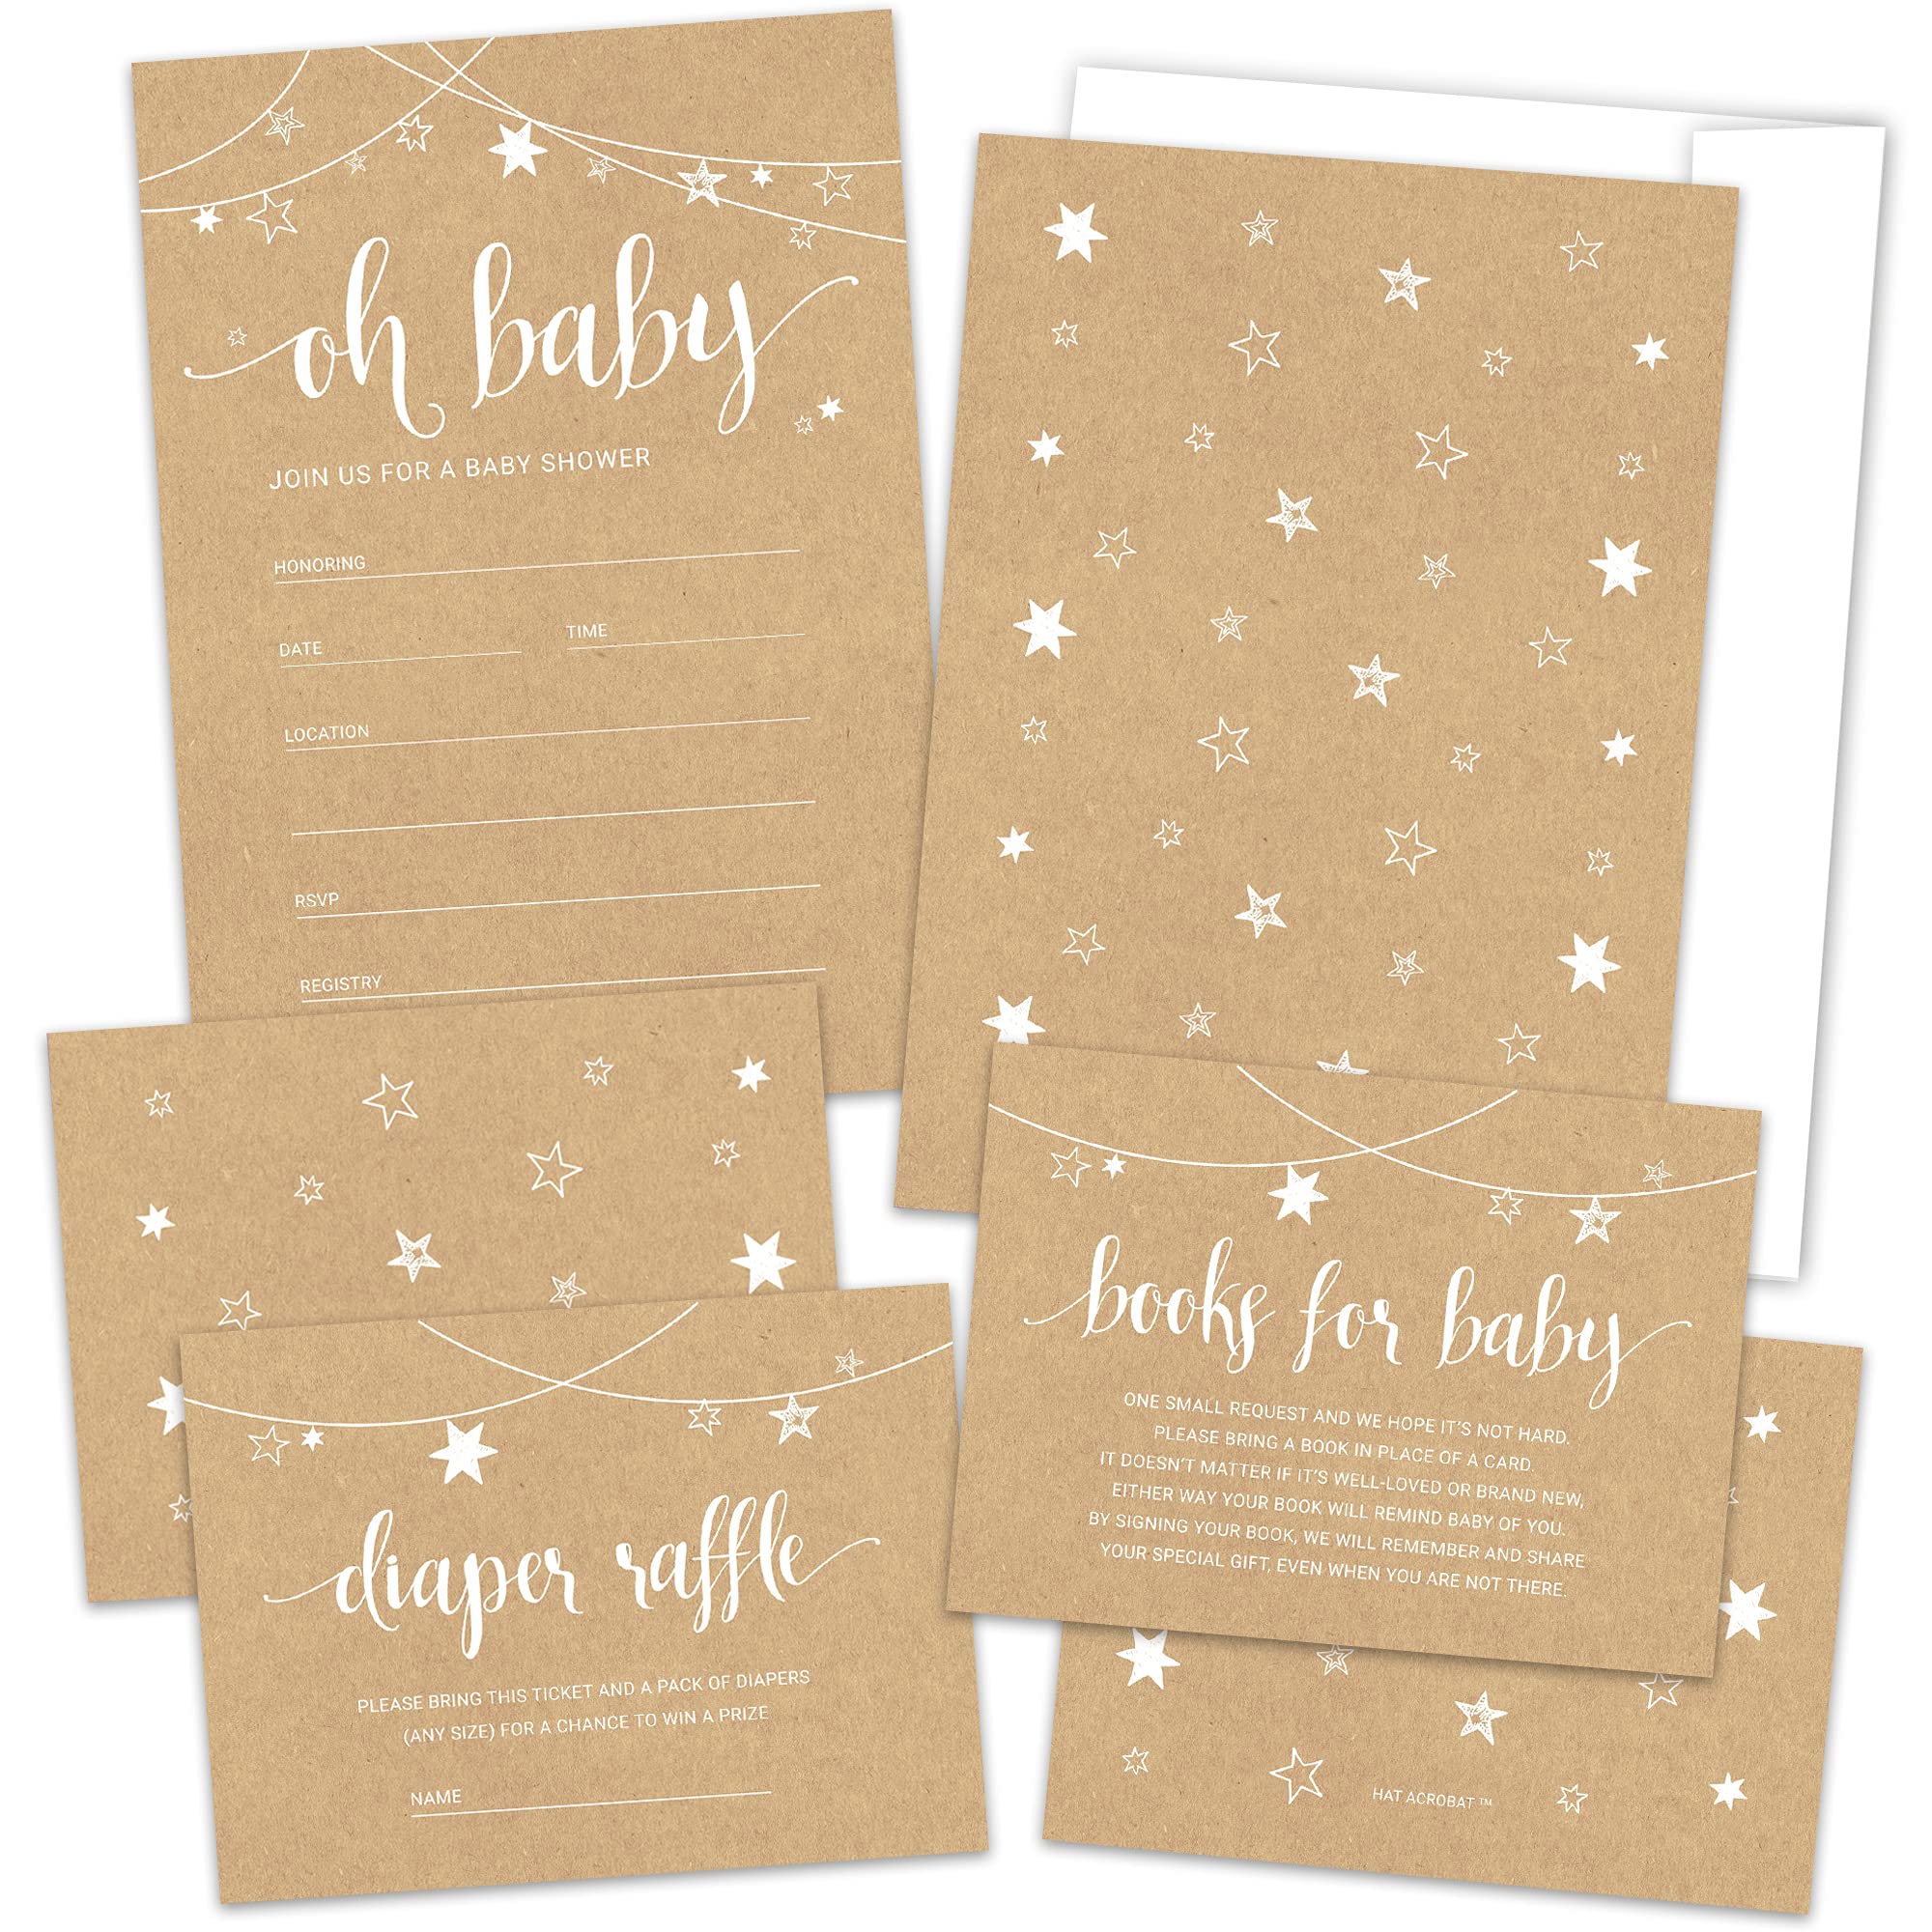 Hat Acrobat - Cute and Rustic Baby Shower Invites with Diaper Raffle Tickets- Double-Sided 25 Cards Each with Envelopes (25)